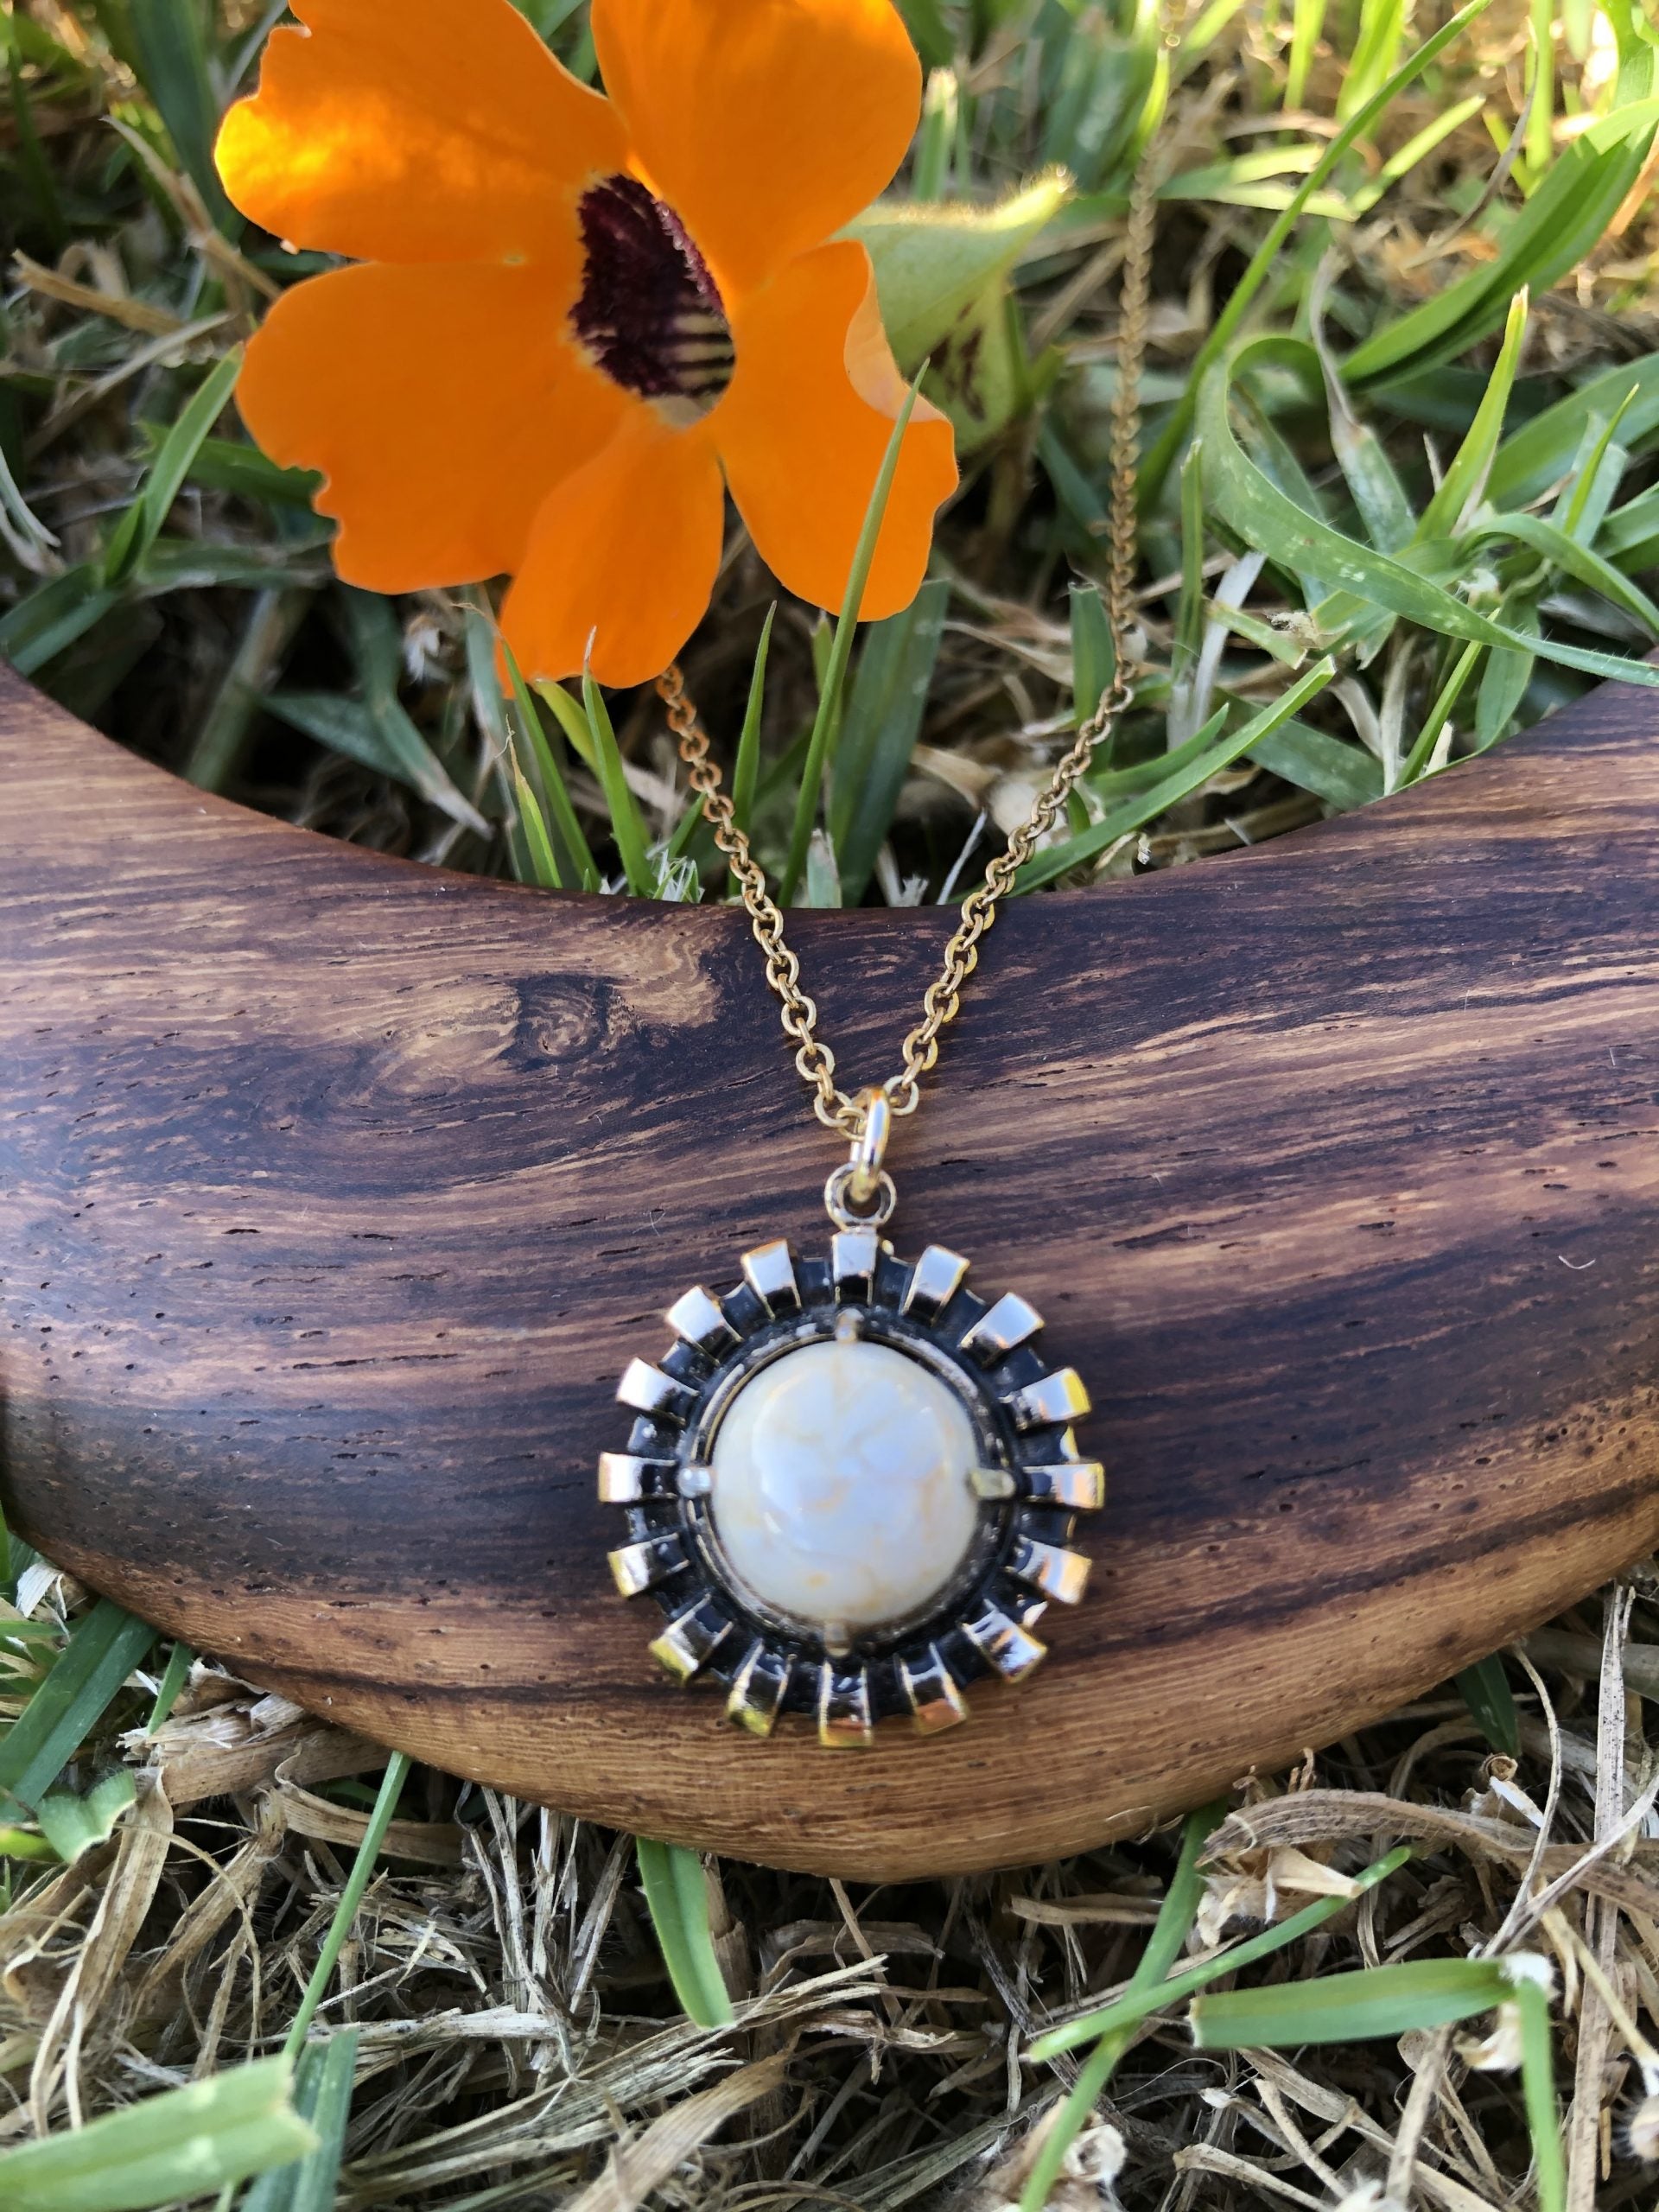 Necklace with natural New Zealand chert, white with gold lace patterns, hand polished to a 10mm round cabochon and set in a gold plated setting with 19 inch chain, on wood, bright